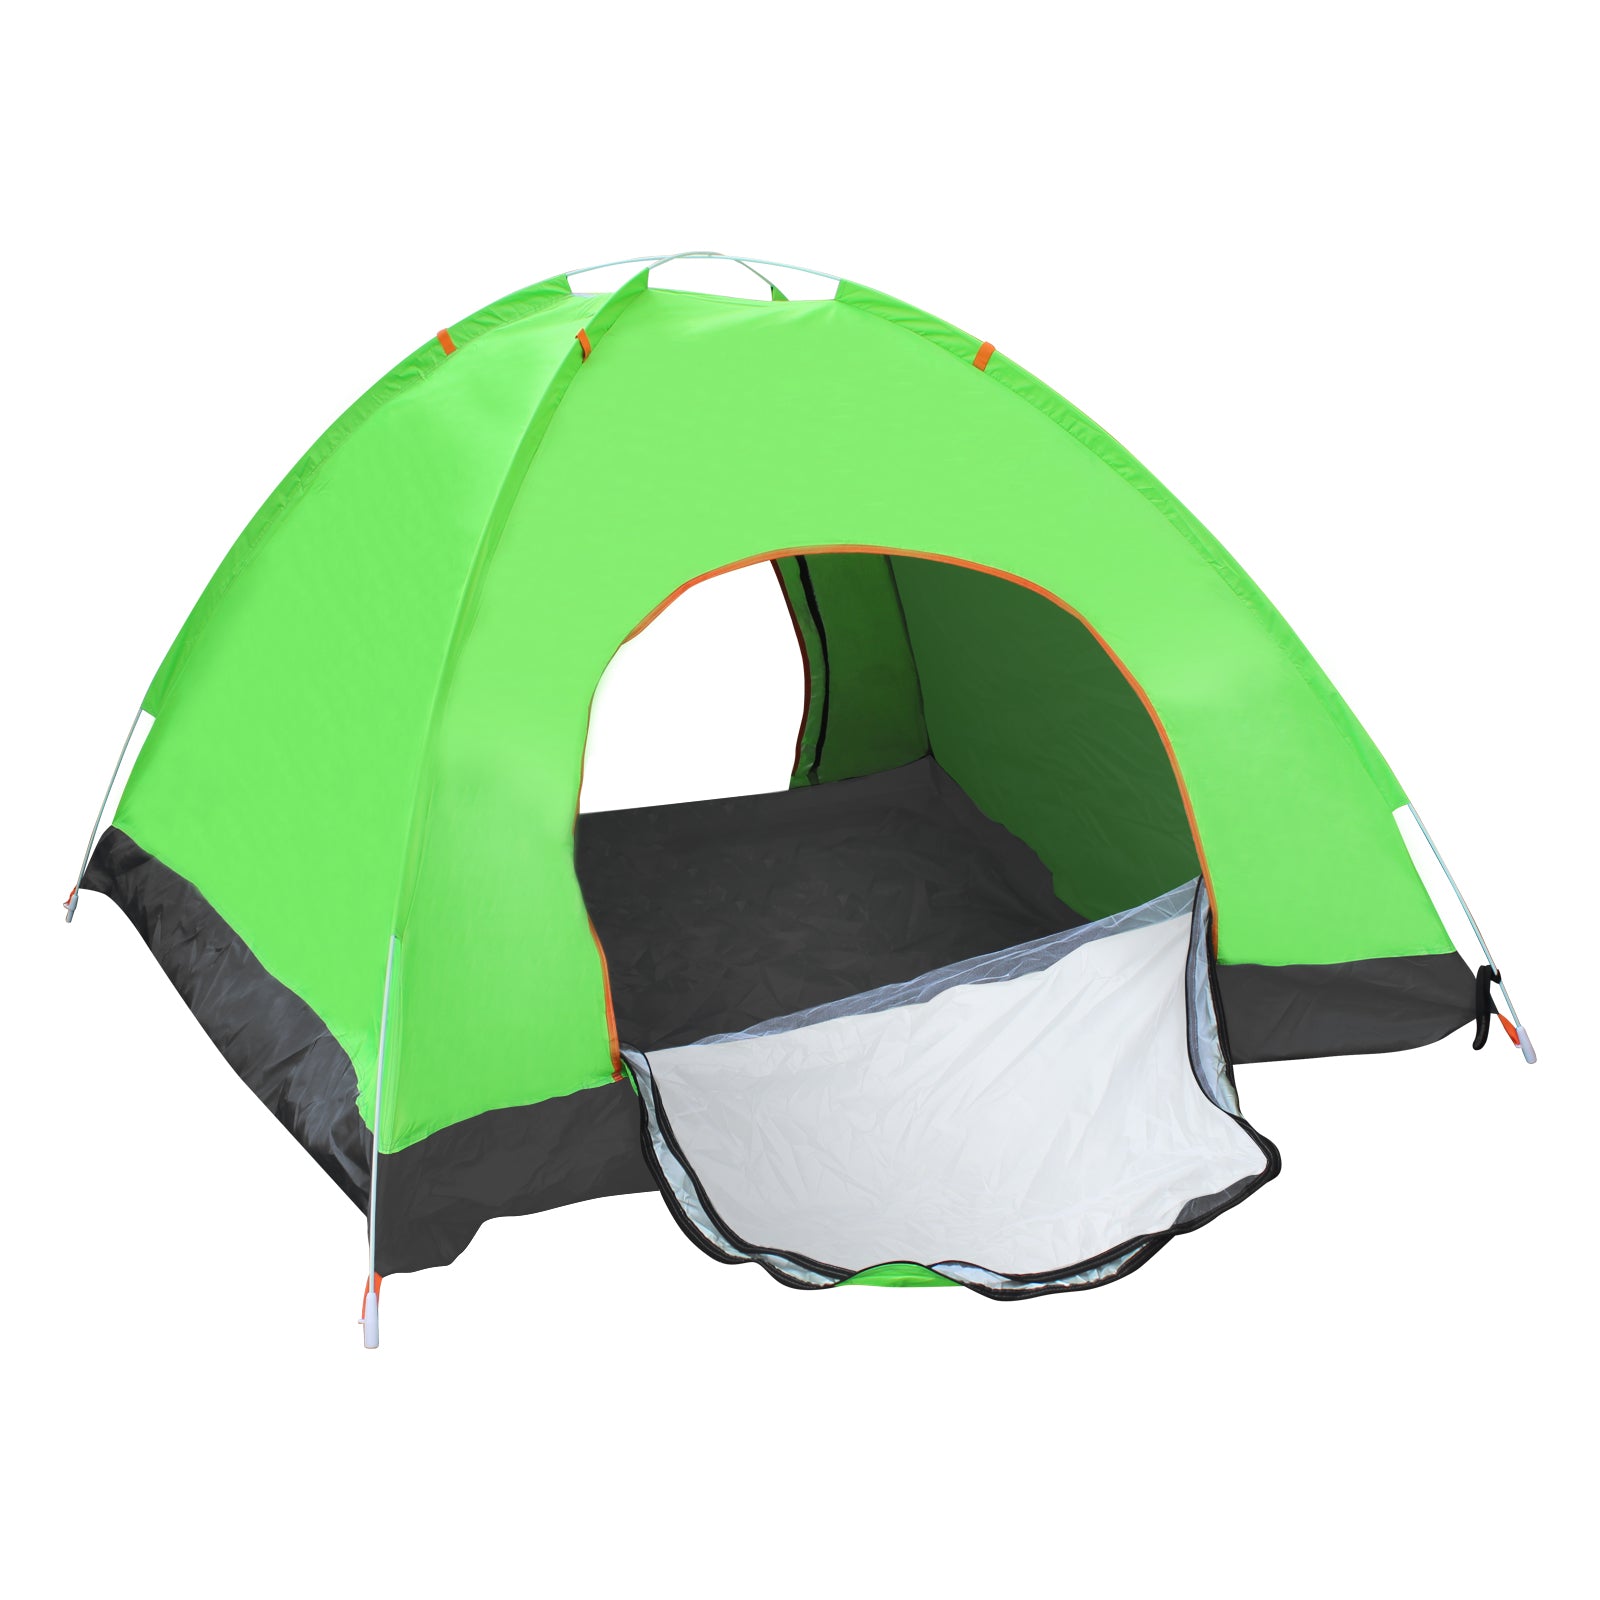 Green Pop Up Tent with Two Doors